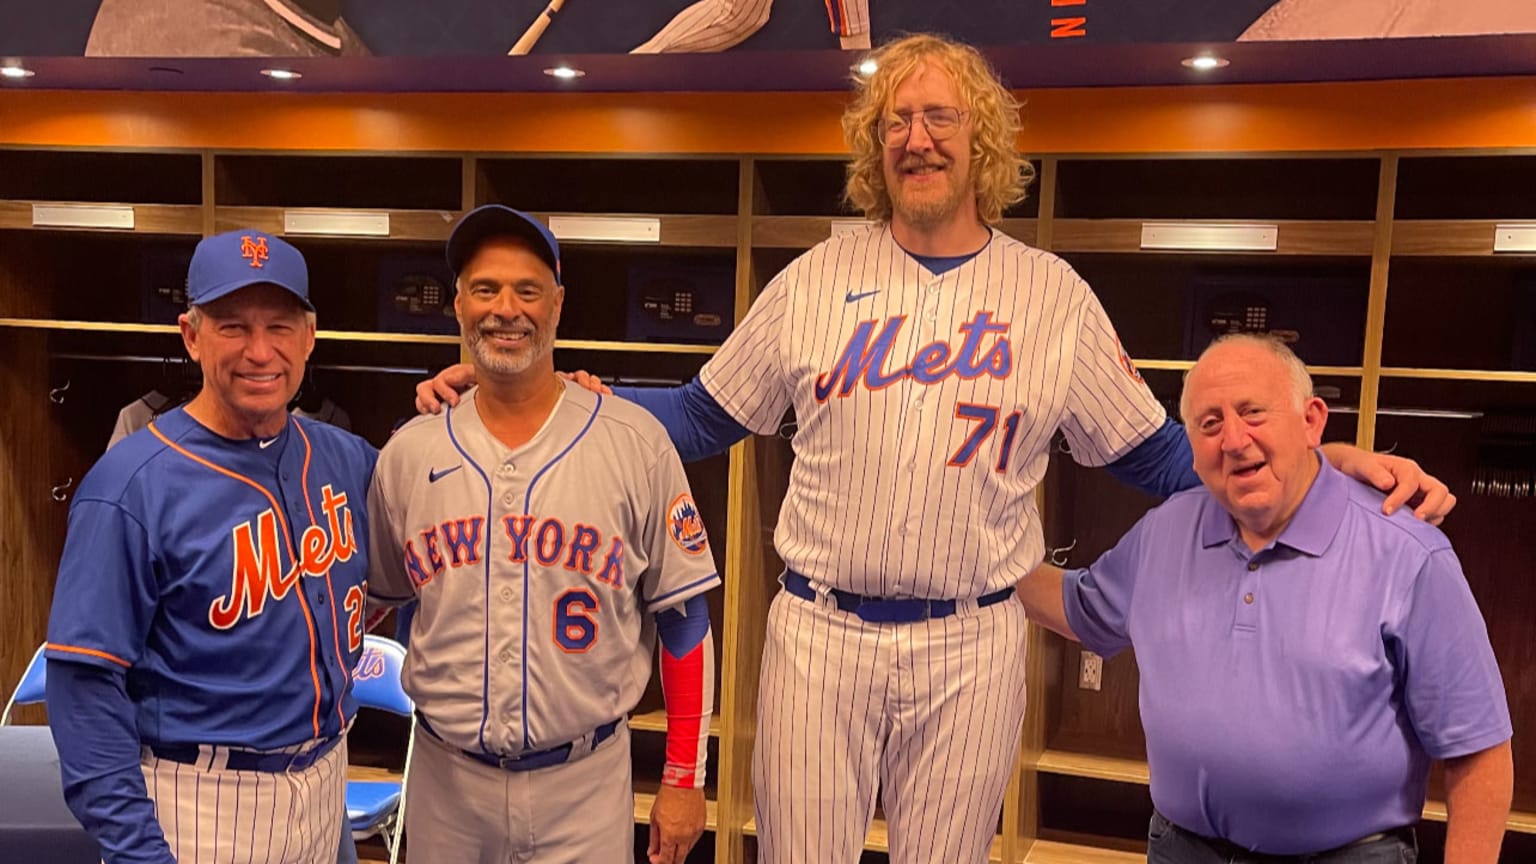 7-foot-2 Mets fan Alan Herbert poses for a photo with two former Mets players and P.R. person Jay Horwitz